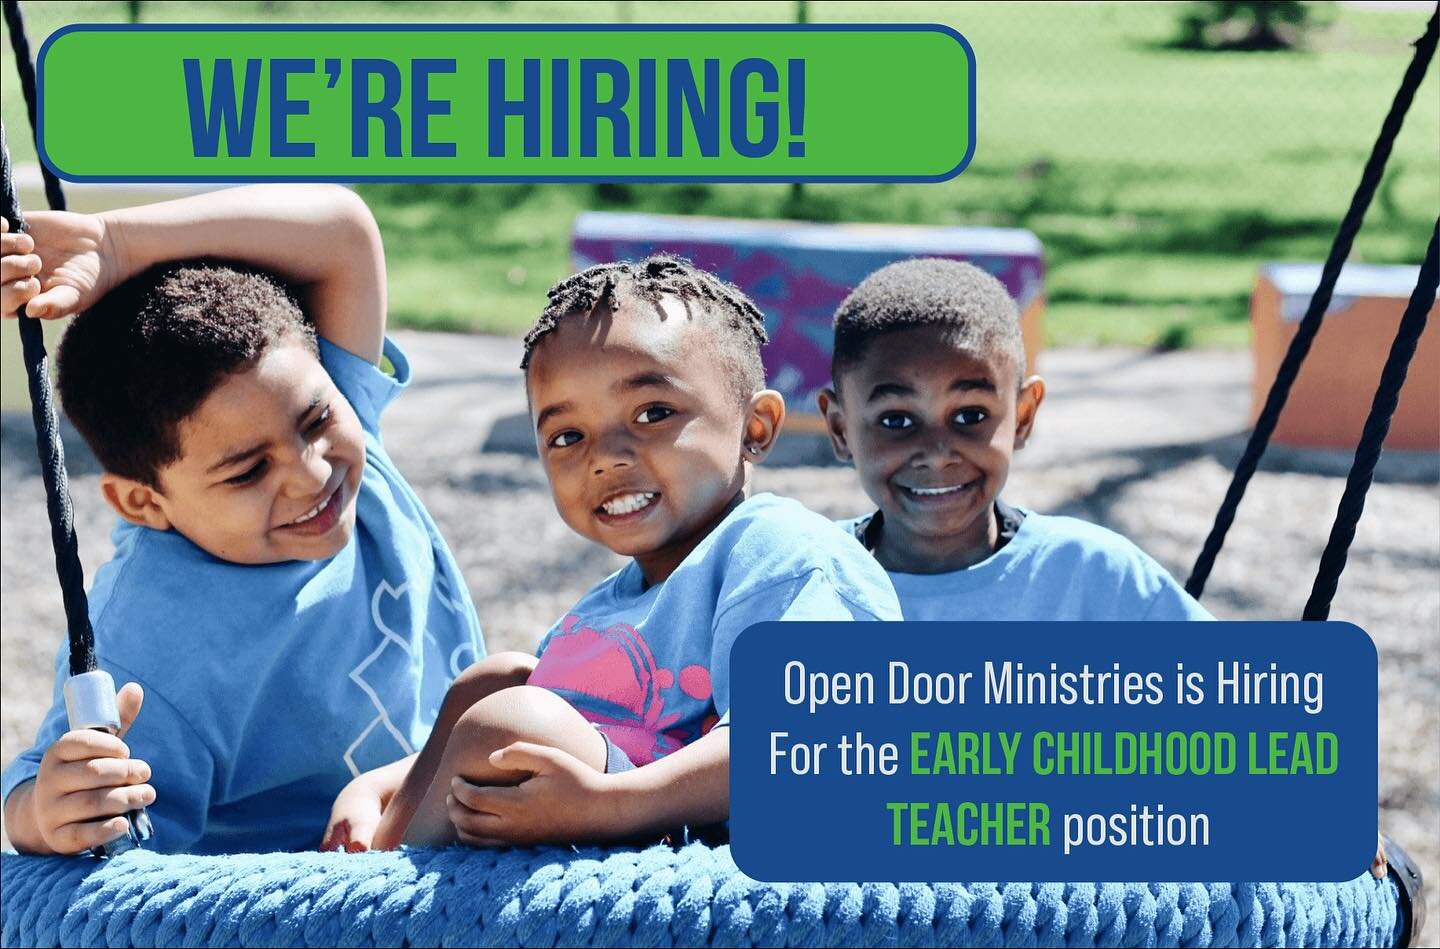 We are hiring for the Early Childhood Lead Teacher position! If you or someone you know might be interested in this position, go to the link in our bio (under Staff Openings) or visit www.odmdenver.org/staff-openings.